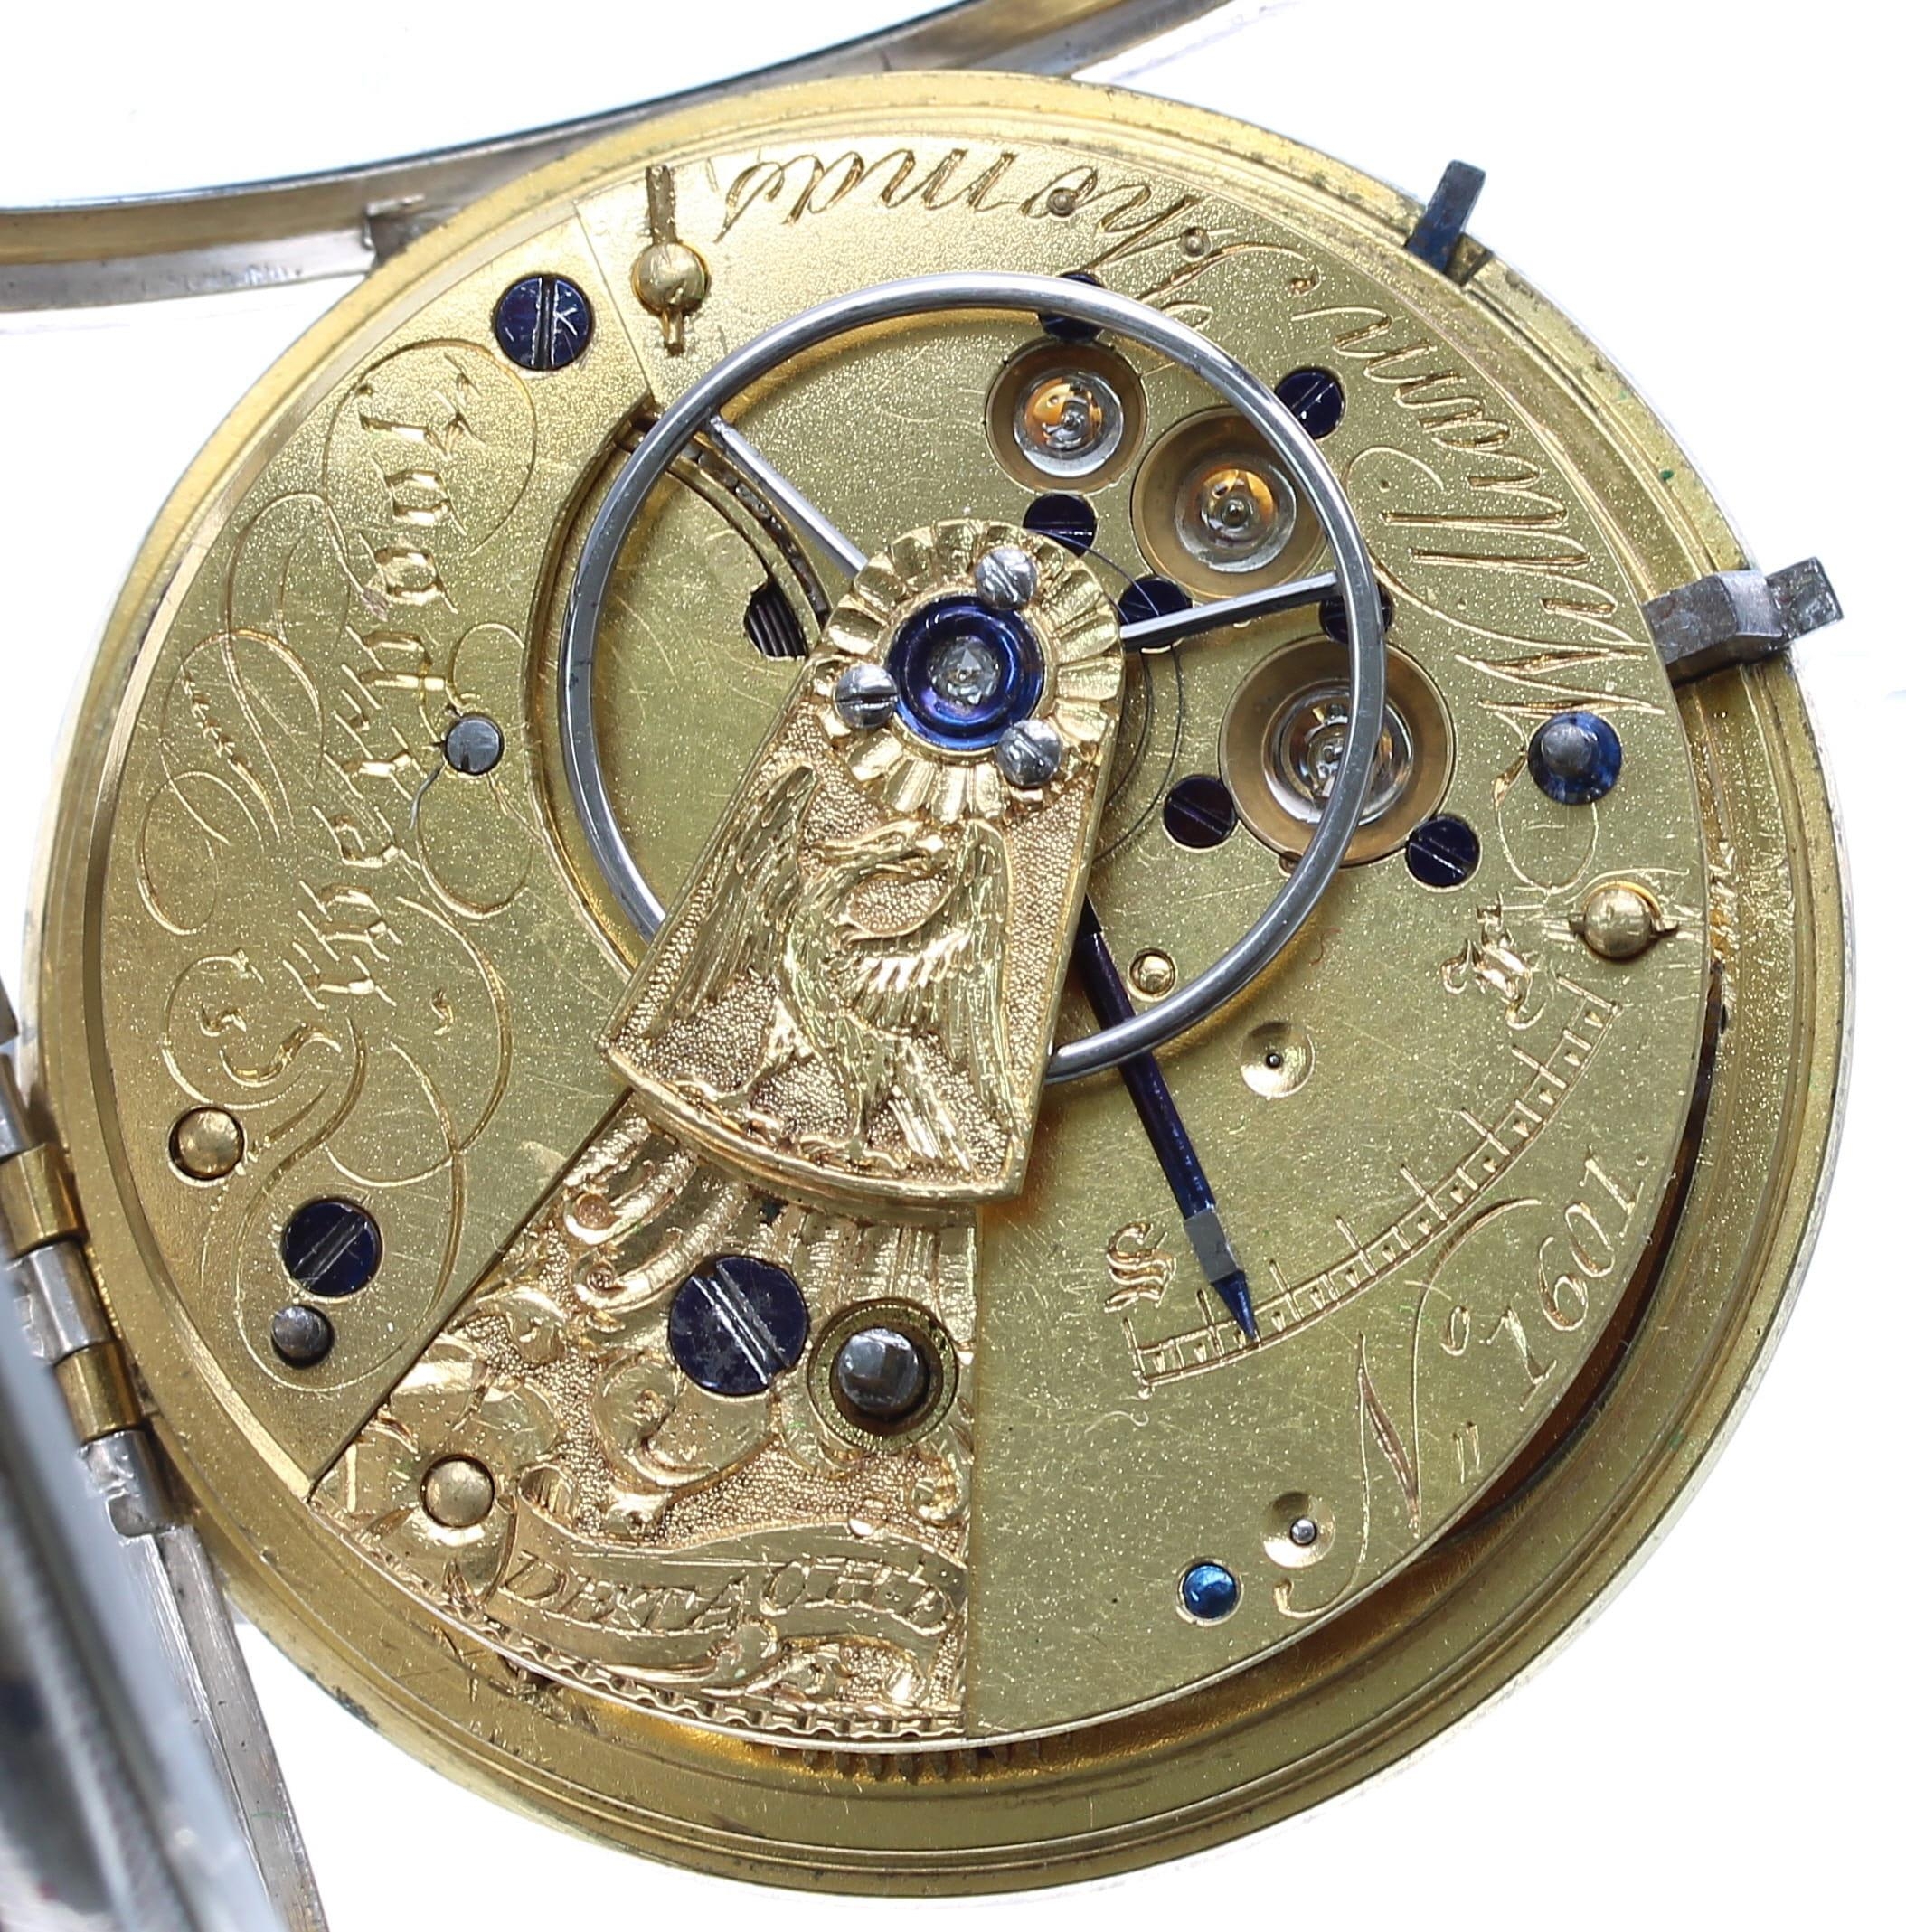 William Thomas, Liverpool - William IV silver detached lever pocket watch, Chester 1836, signed - Image 3 of 4